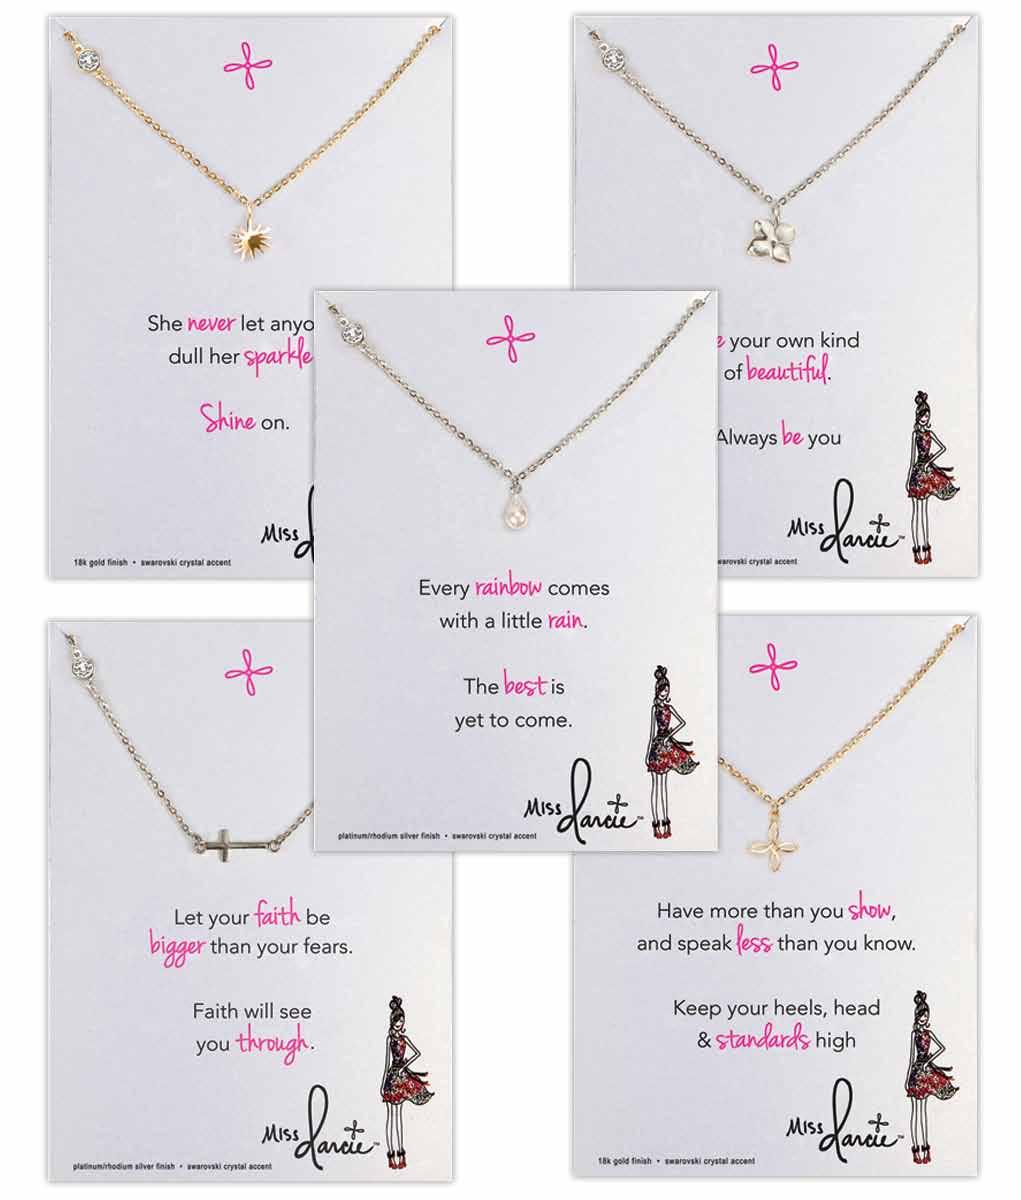 18-PIECE MISS DARCIE NECKLACE ASSORTMENT Crafted of Rhodium or 18K Gold Plate with Swarovski Crystal accent. Lobster claw closure; 16" L with 2" extender. Carded and gift boxed.